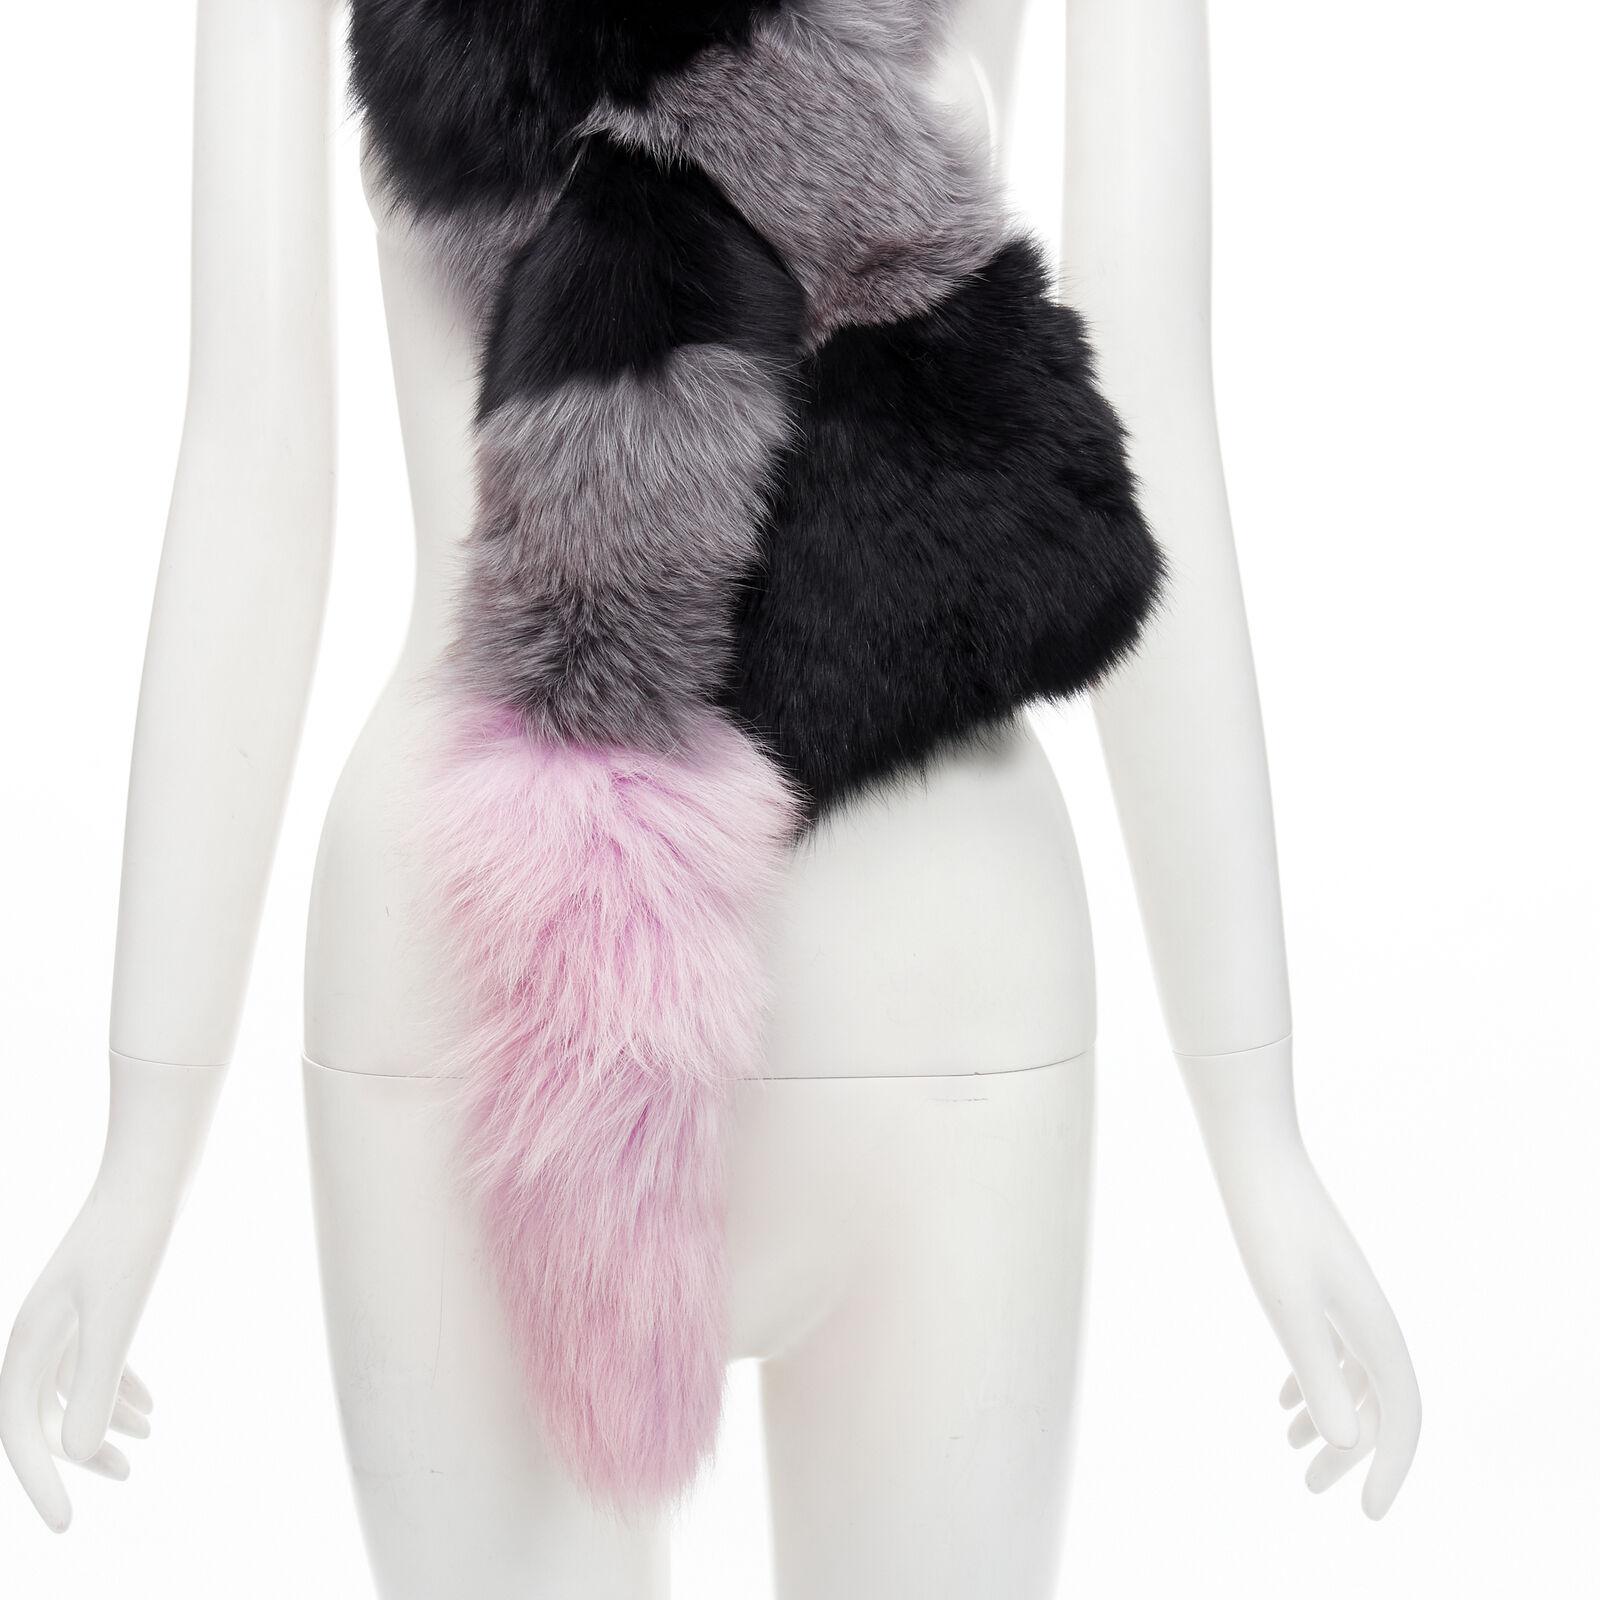 CHARLOTTE SIMONE 100% fur black pink striped tail silk lined loop through scarf
Reference: LNKO/A02079
Brand: Charlotte Simone
Material: Fur
Color: Black, Multicolour
Pattern: Solid
Lining: Silk
Made in: China

CONDITION:
Condition: Excellent, this